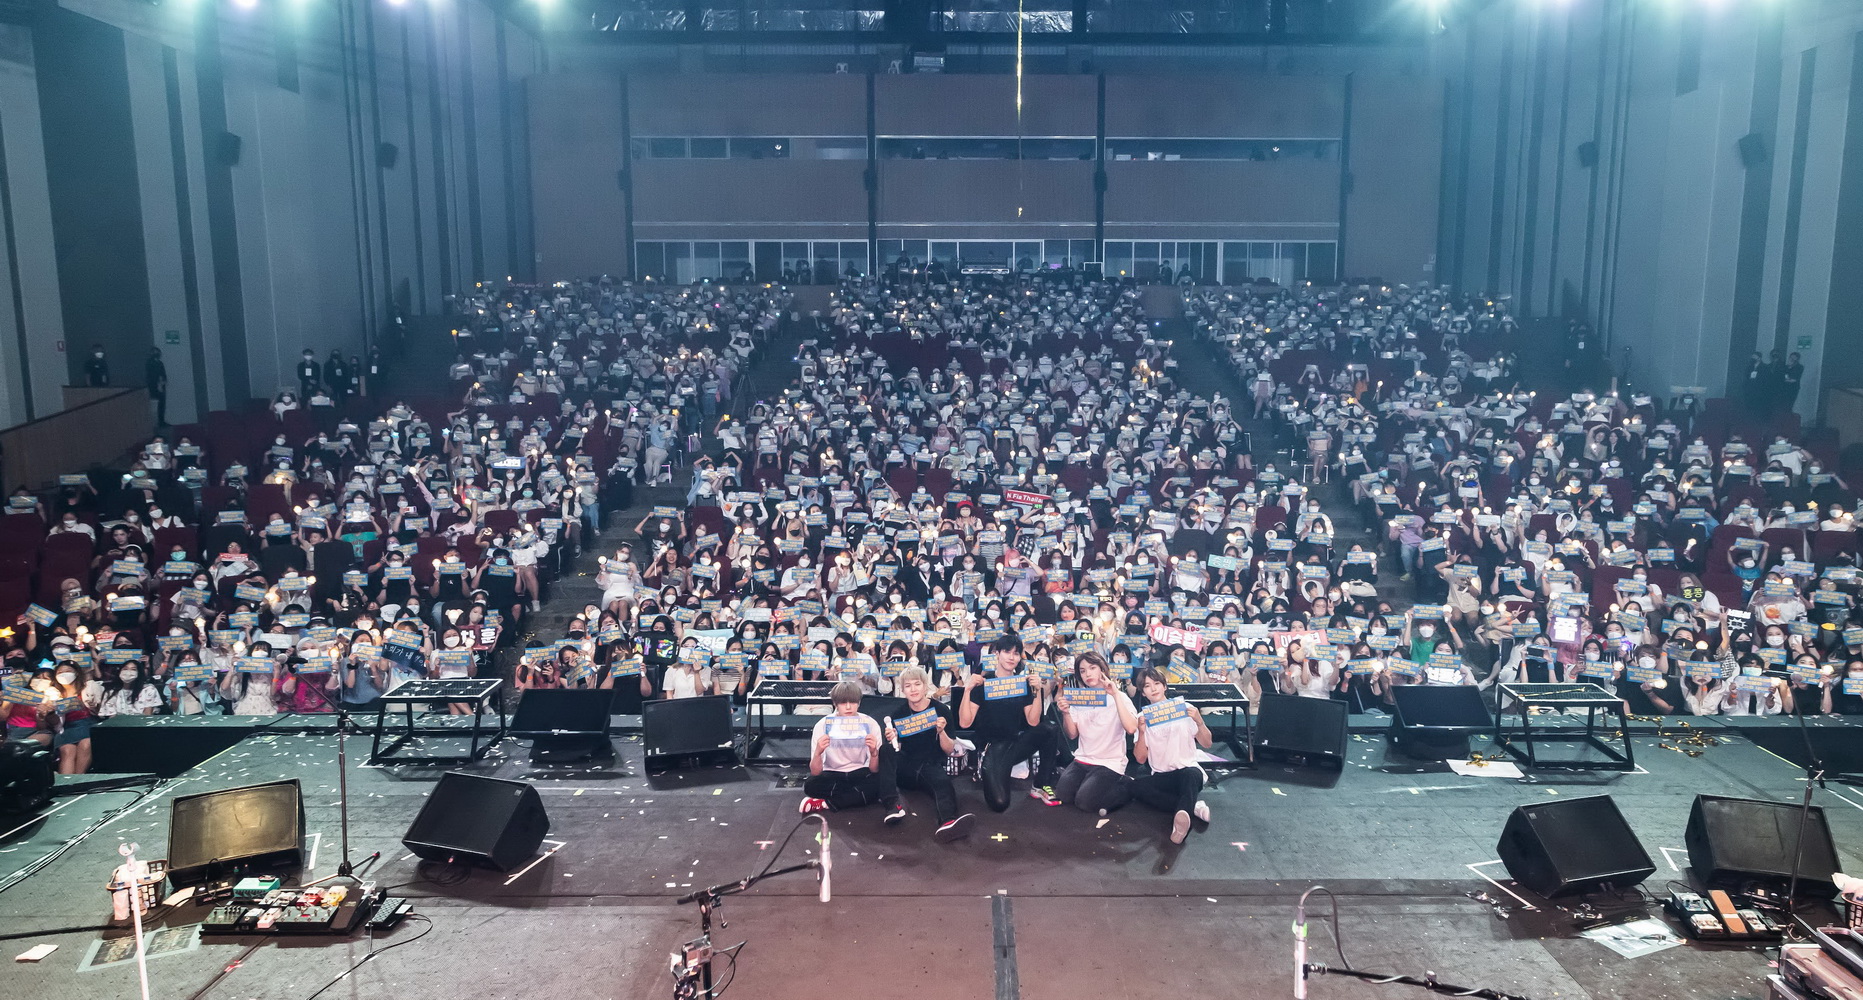 2022 N.Flying Live 'Into The Light’ in Bangkok